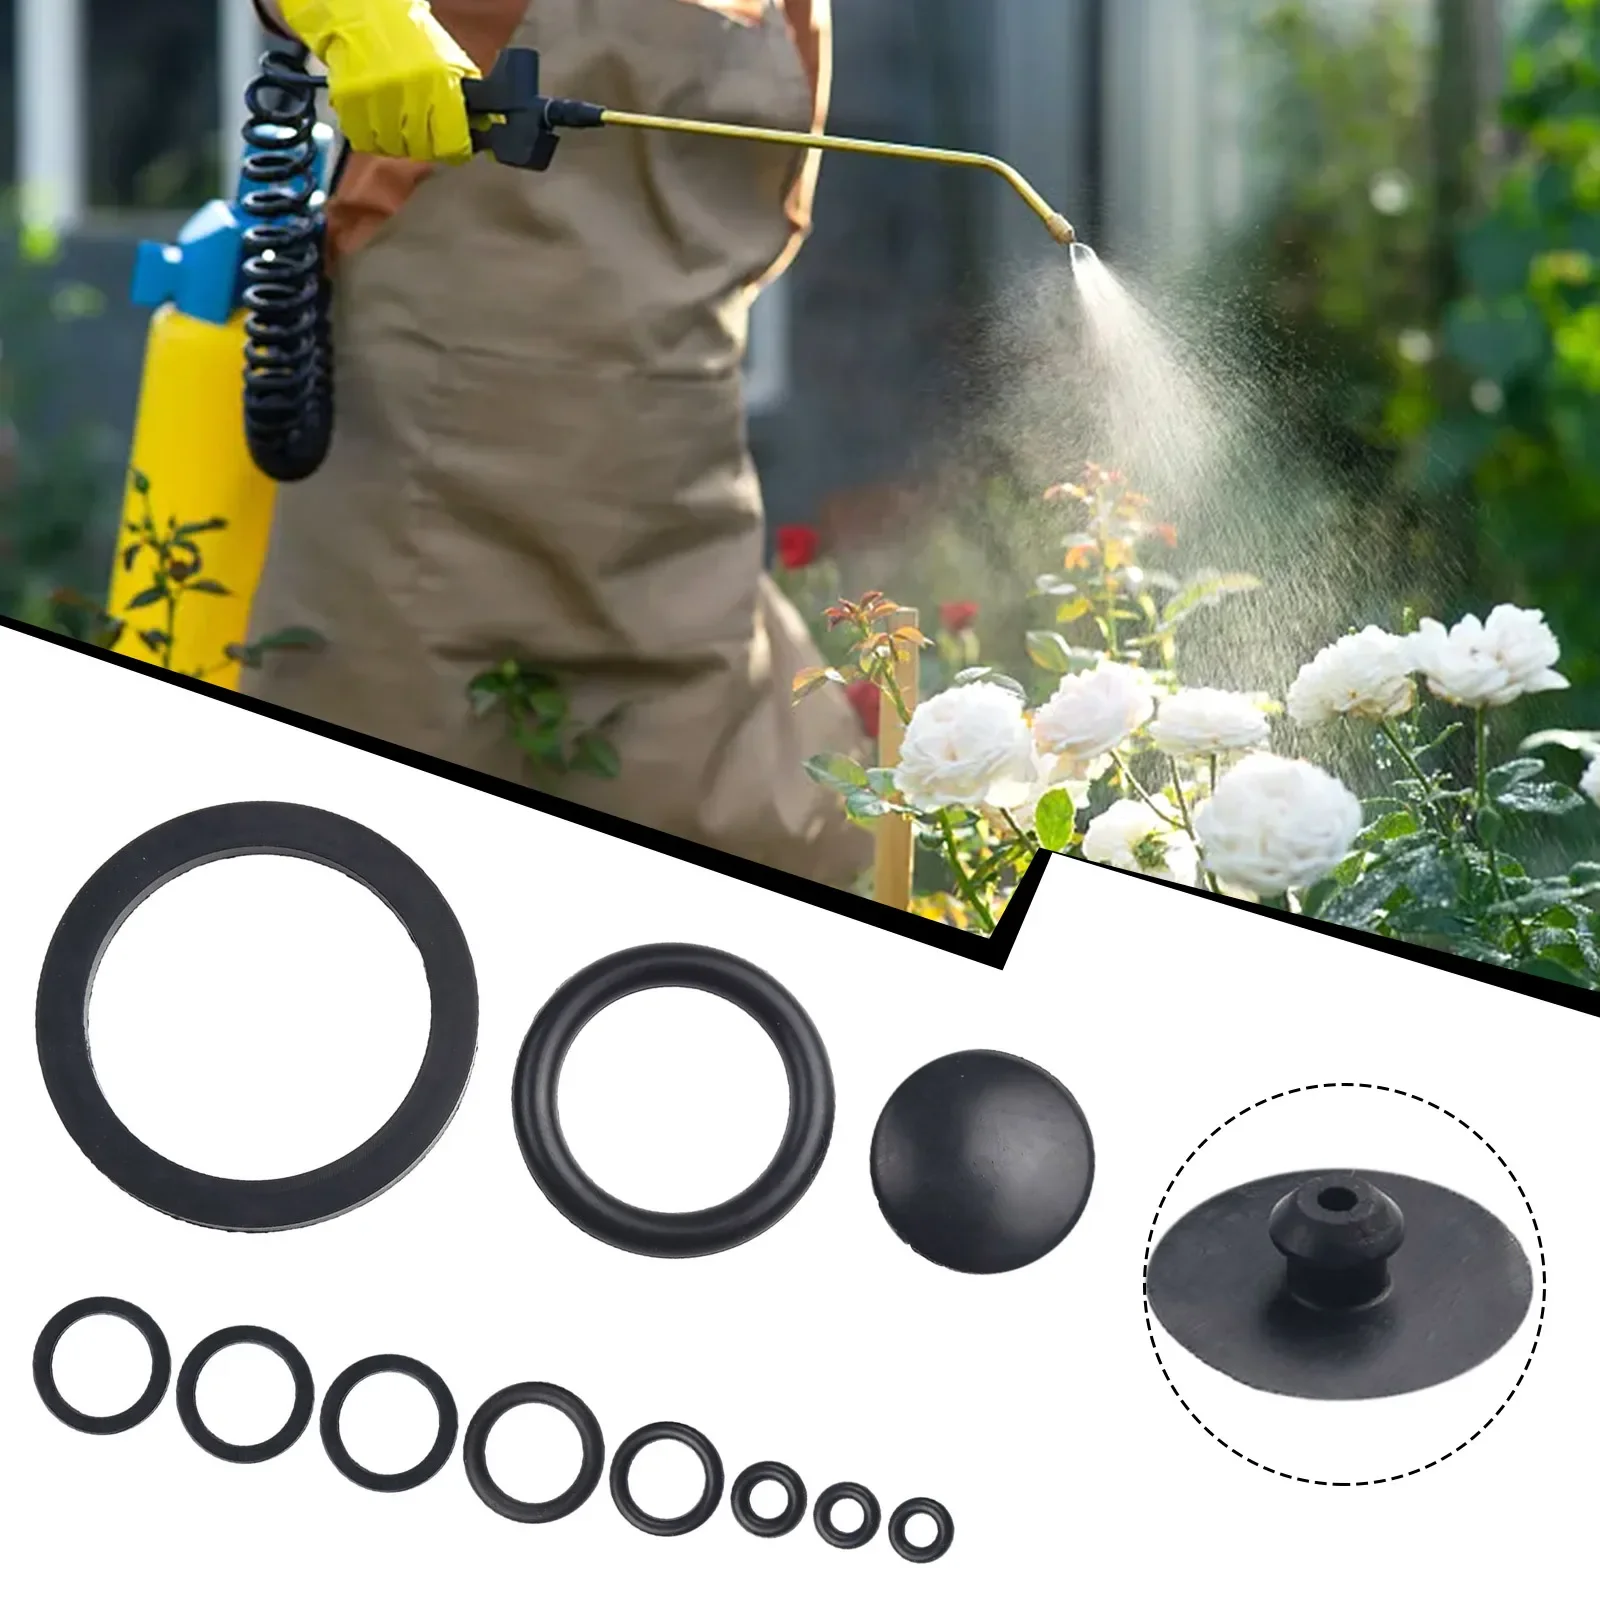 Keep Your Sprayer In Top Condition With These 10 Durable Rubber Sealing Rings For 3/5/8L Sprayers Essential Garden Accessories